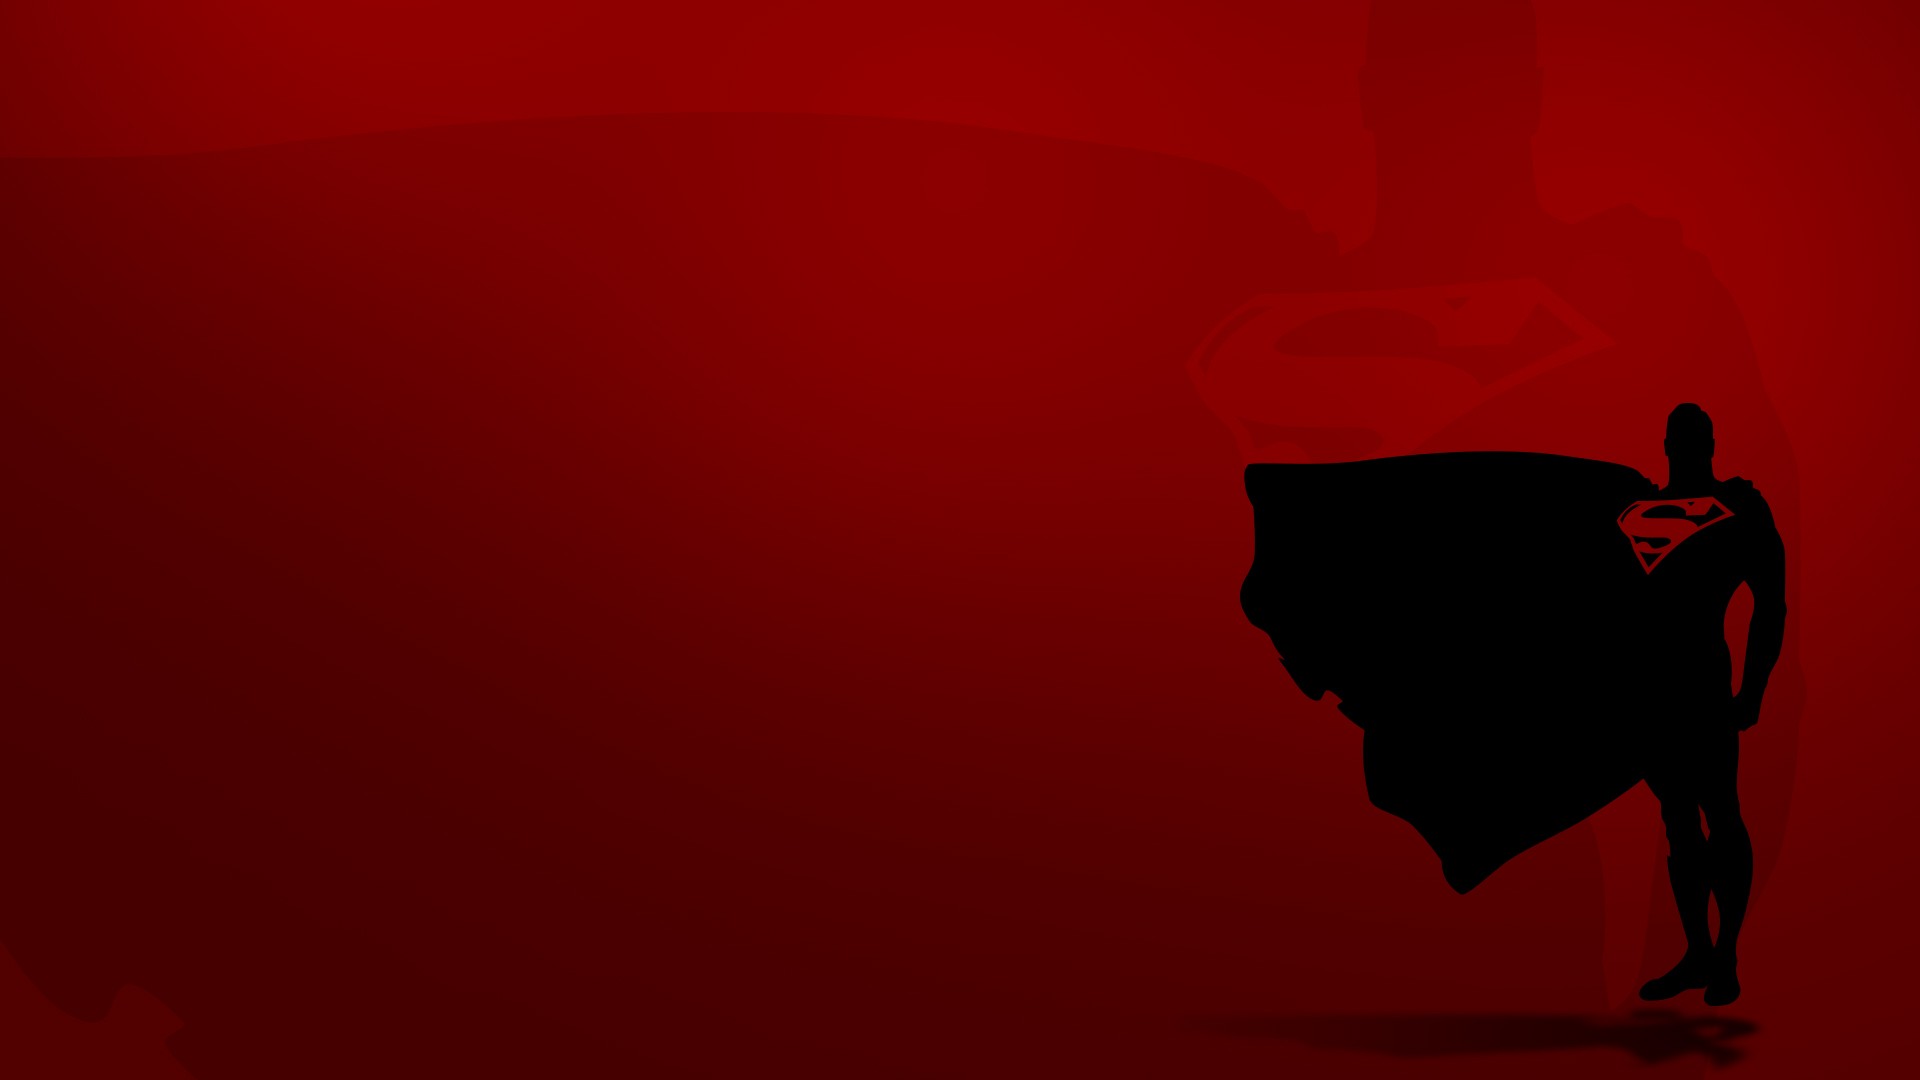 superman hd wallpaper,red,black,silhouette,red flag,fictional character